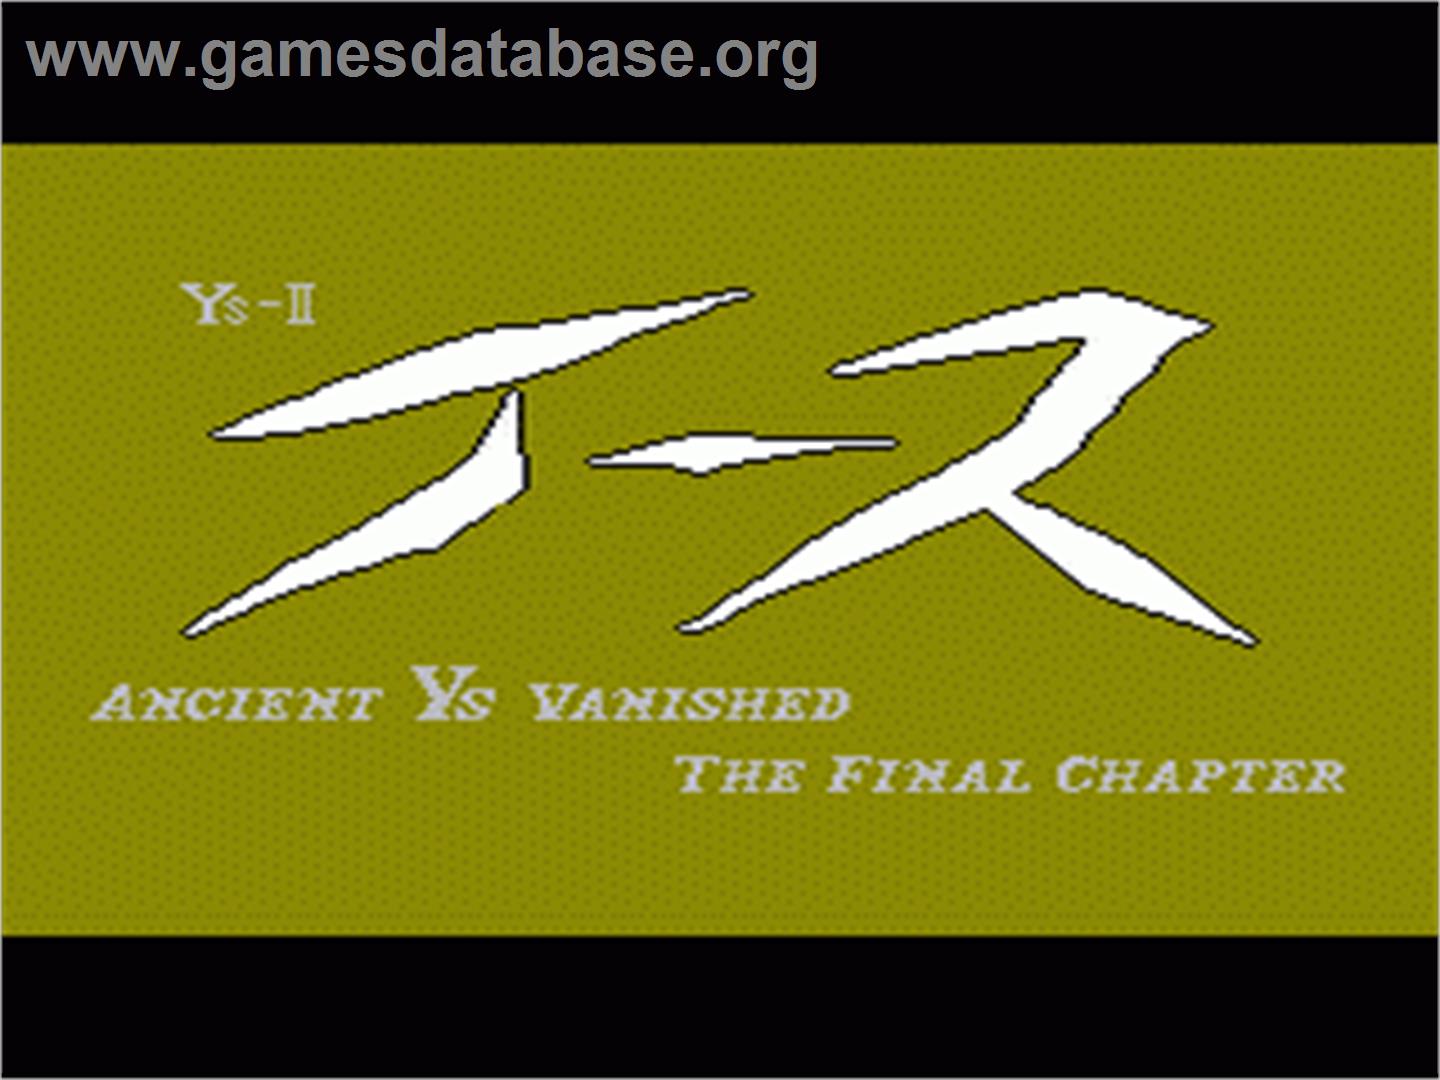 Ys II: Ancient Ys Vanished: The Final Chapter - Nintendo NES - Artwork - Title Screen